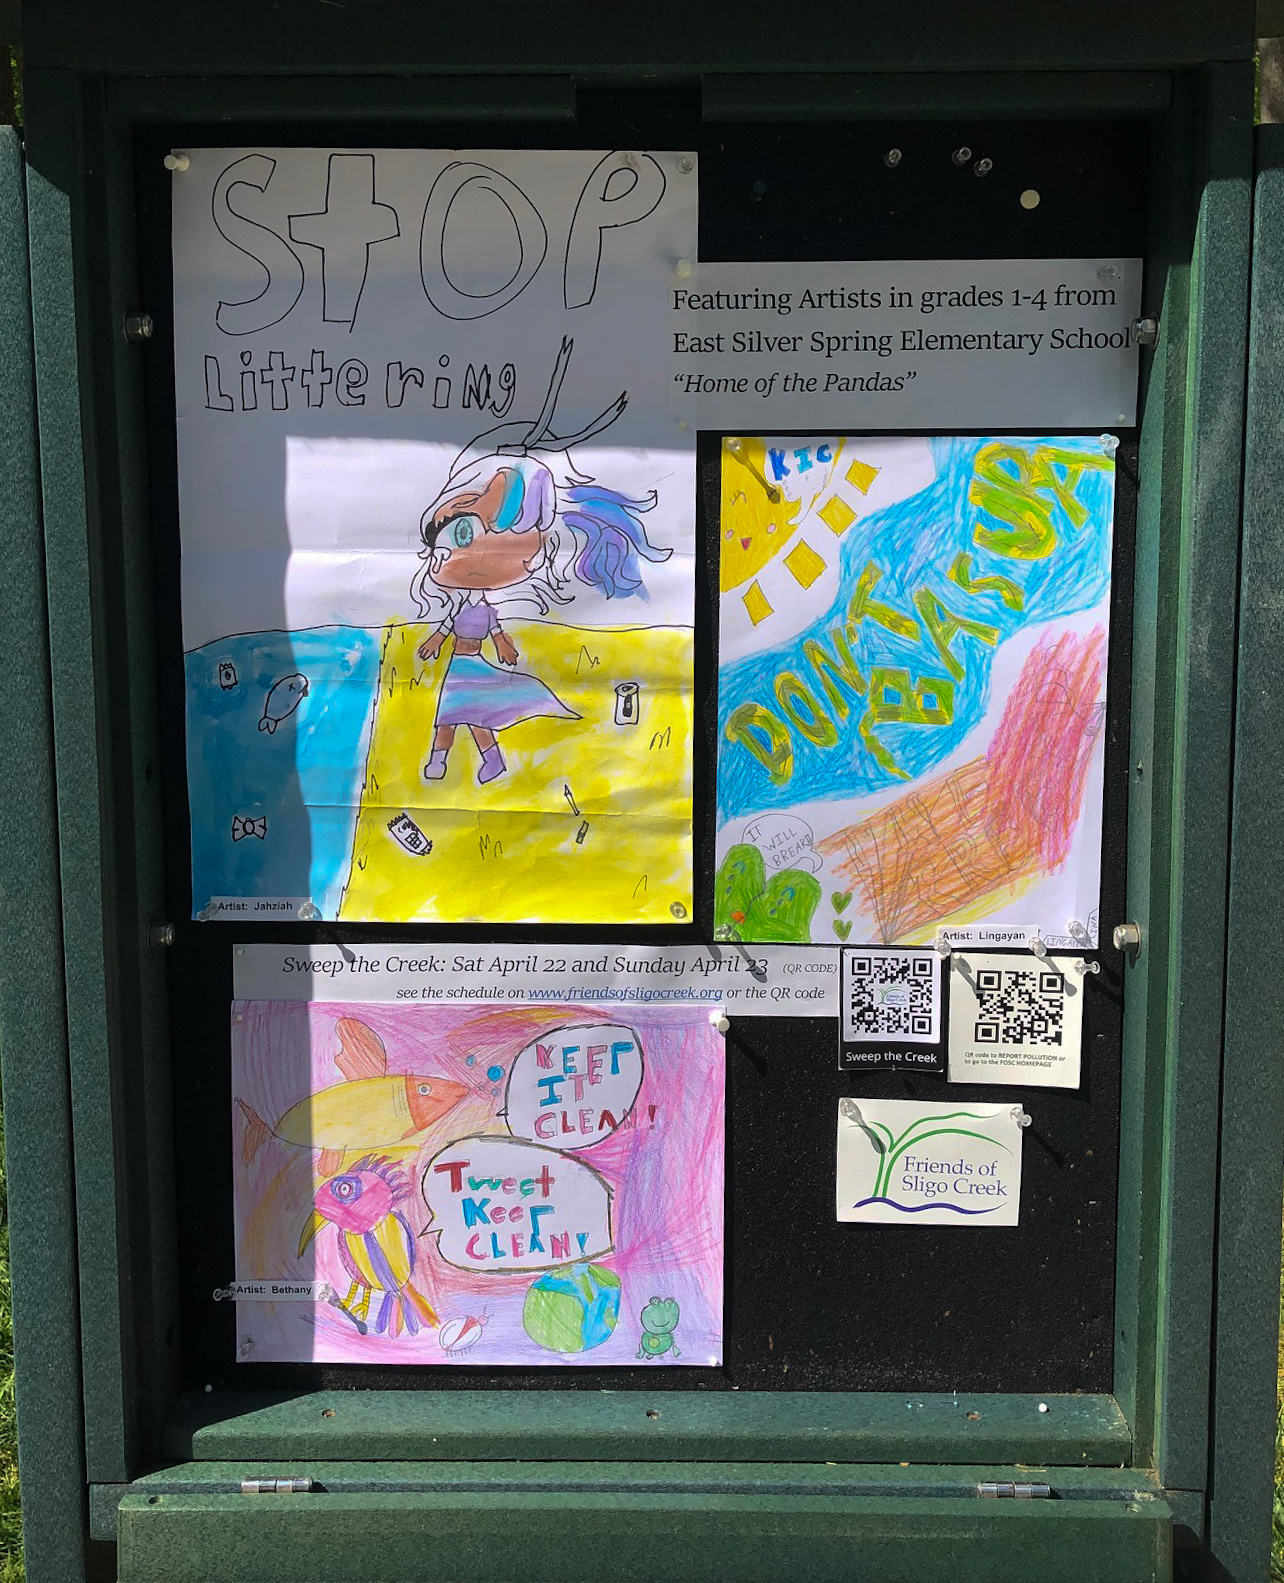 Section 3 Kiosk exhibiting students' artwork about Sweeping the Creek of litter.